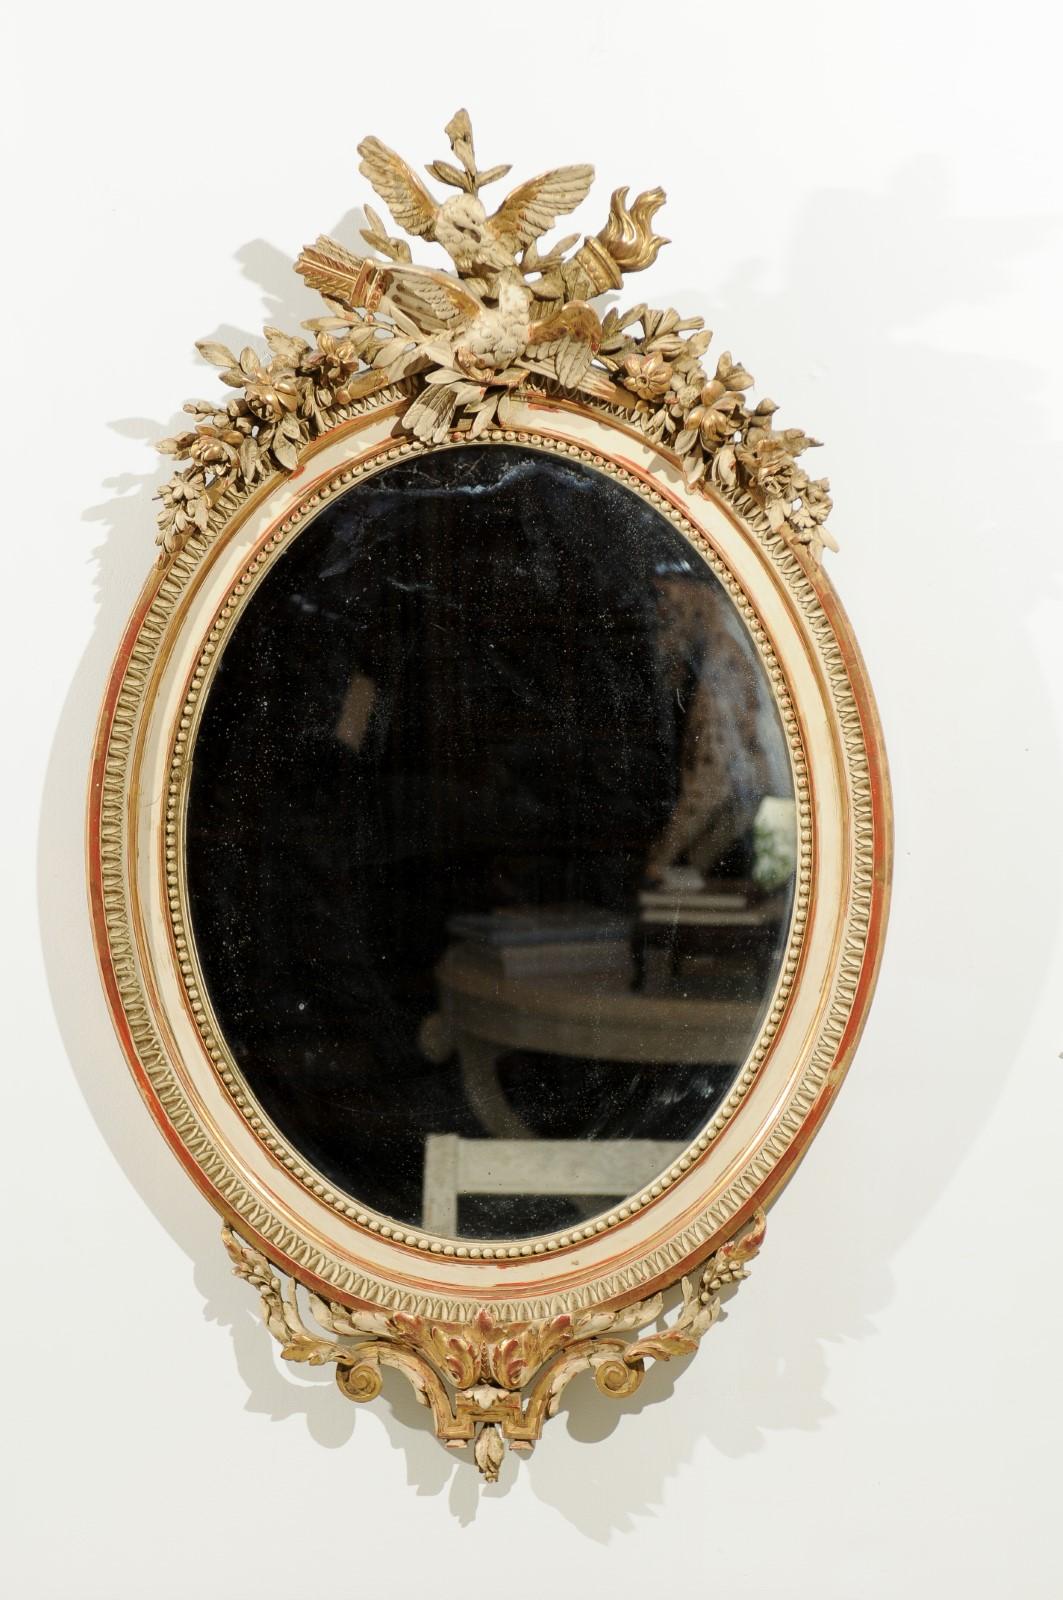 A French oval painted and parcel gilt marriage mirror from the 19th century, with carved crest and kissing doves. Featuring an oval shape, this exquisite French wall mirror exudes a romanticism particularly appropriate for a marriage piece. Our eye